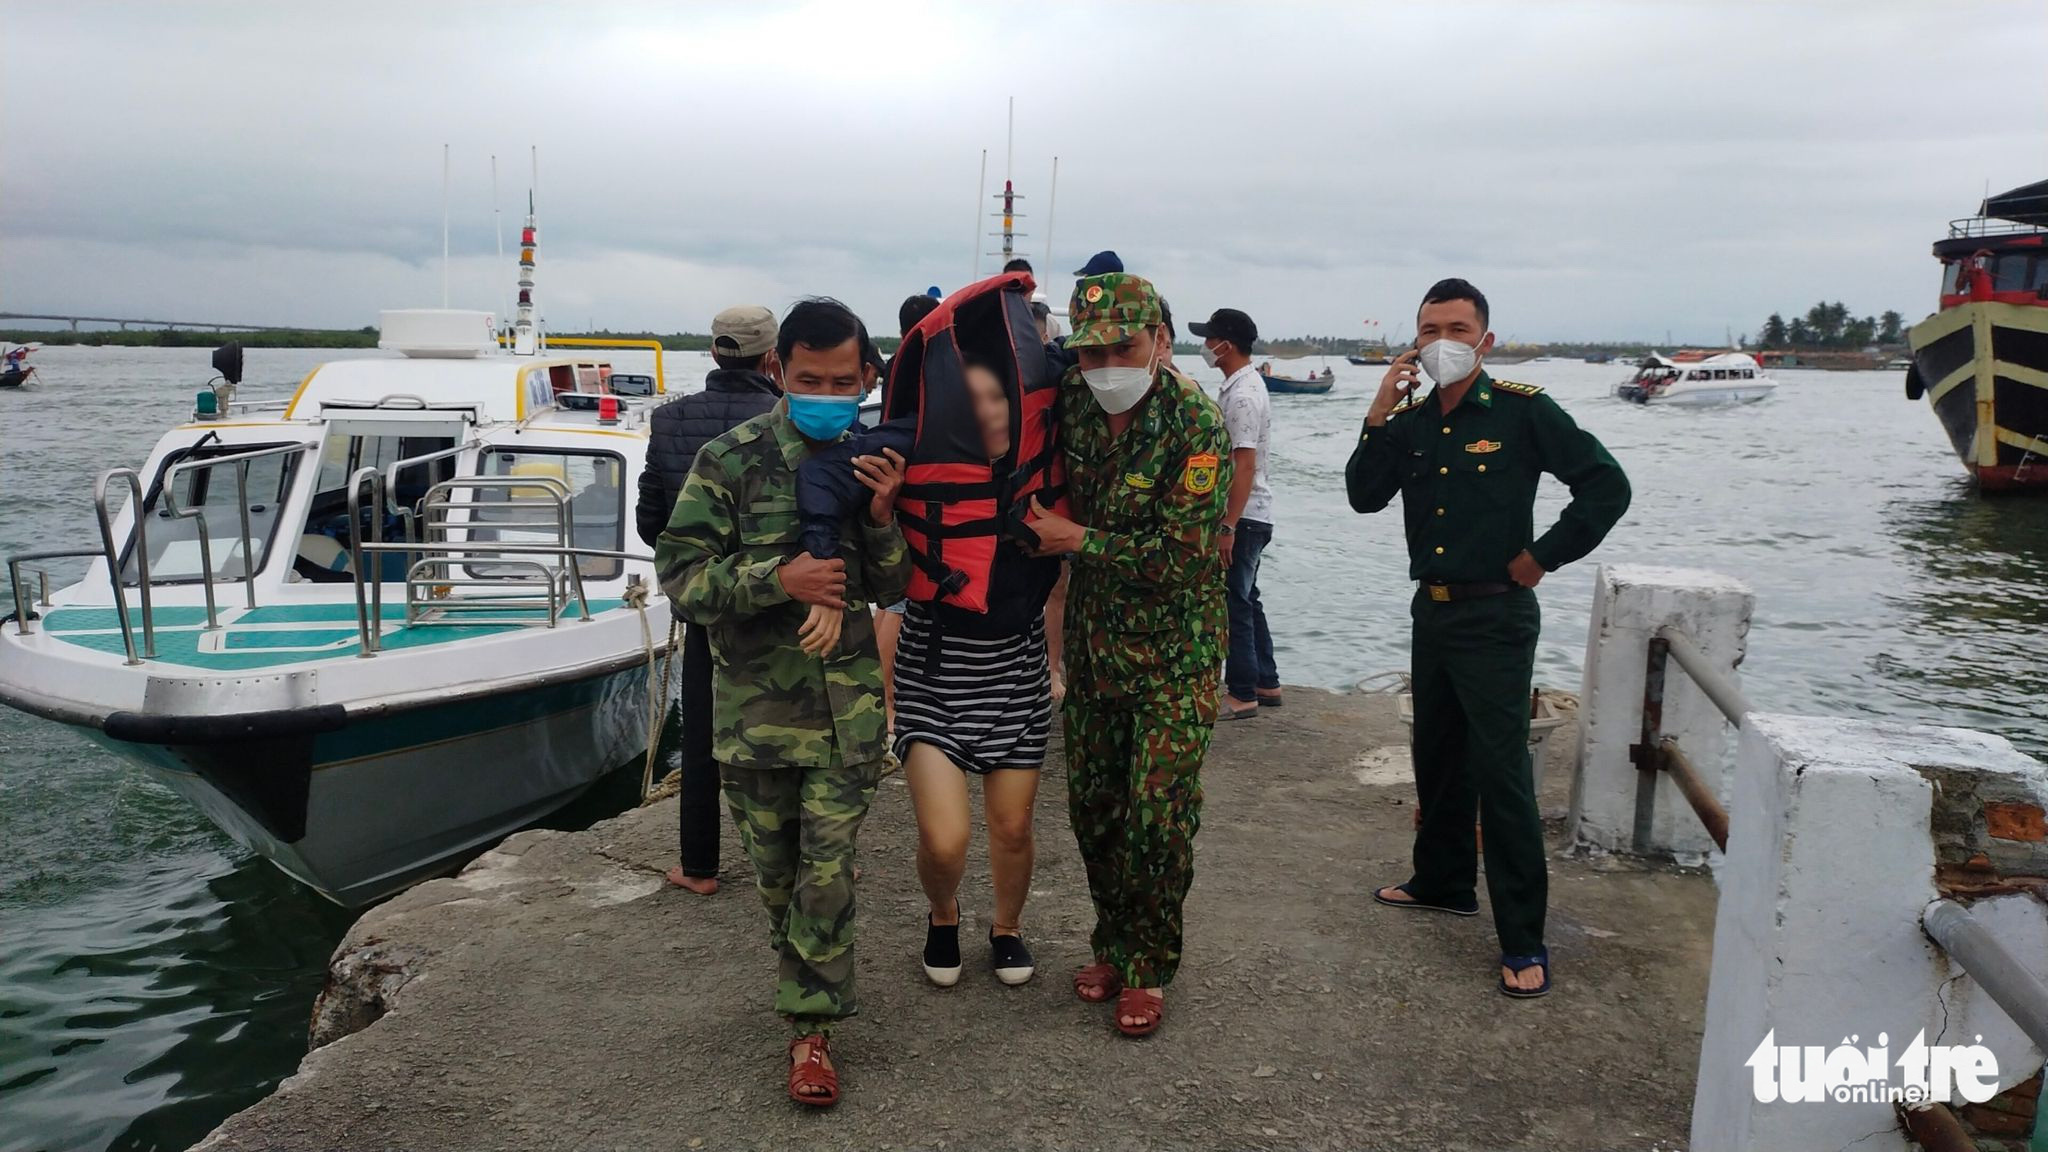 Rescuers take one victim ashore after a canoe capsized off Vietnam’s central coast of Hoi An in Quang Nam Province, February 26, 2022. Photo: Colonel Hoang Van Man Handout via Tuoi Tre